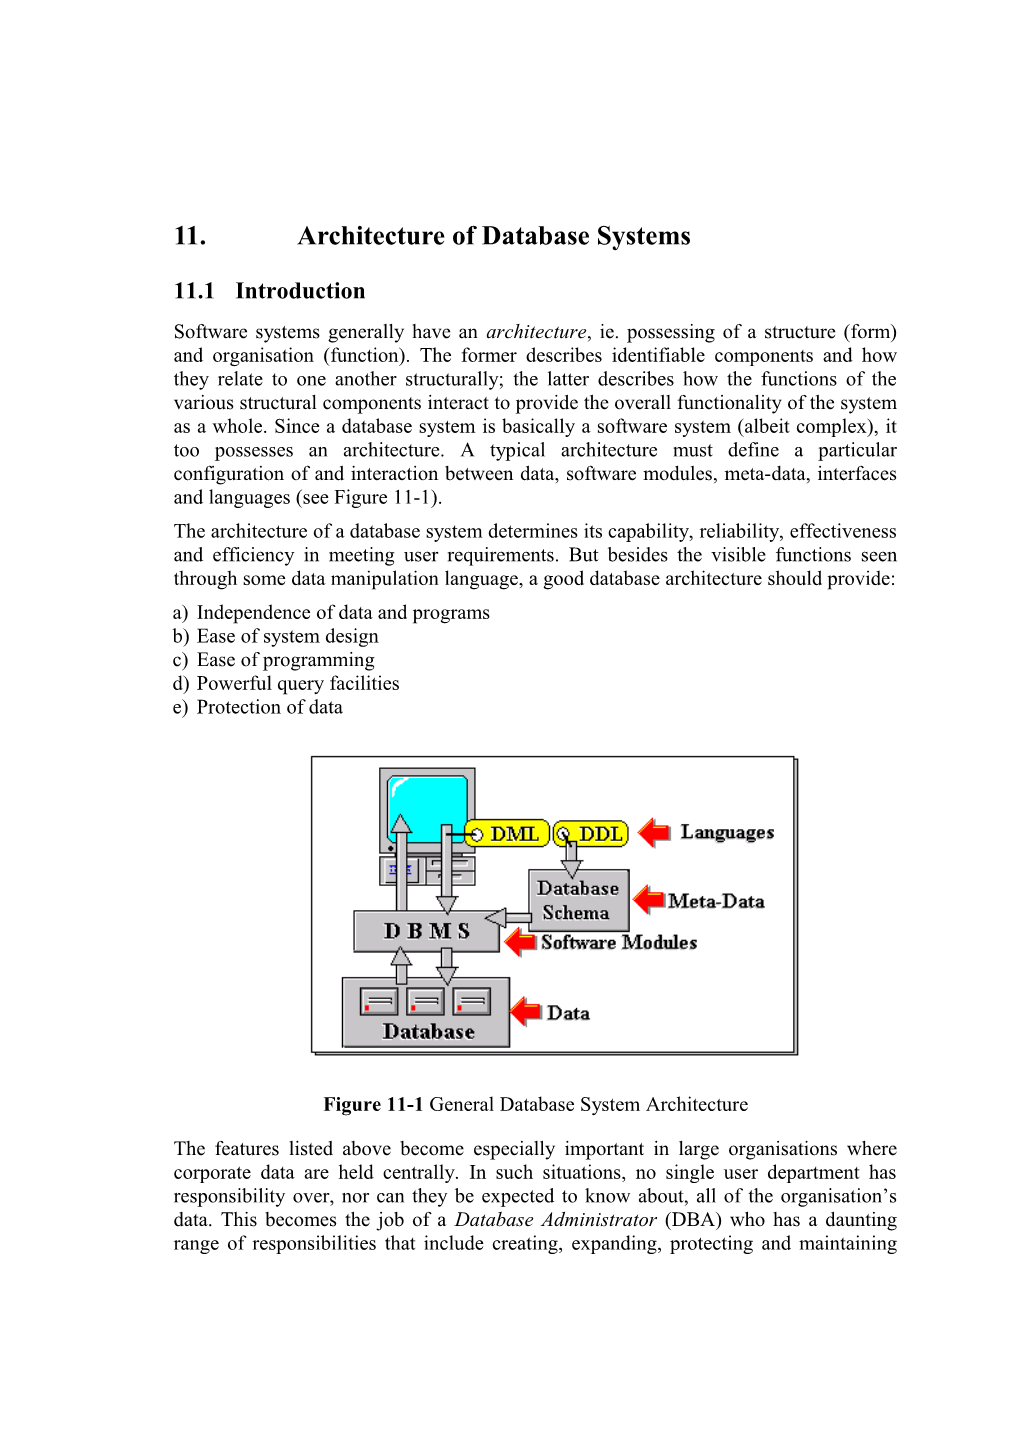 11. Architecture of Database Systems